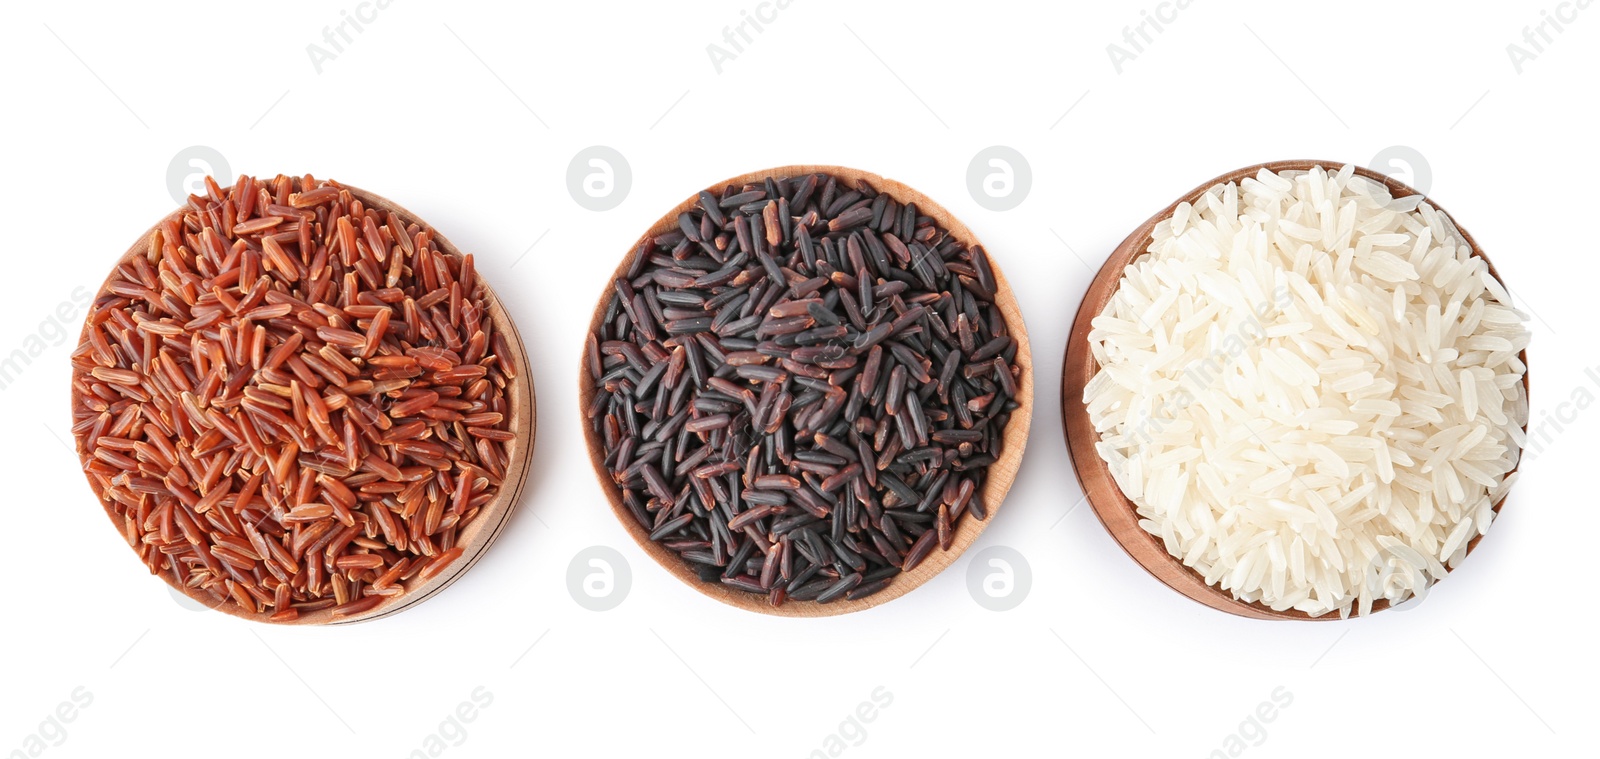 Photo of Bowls with different types of uncooked rice on white background, top view